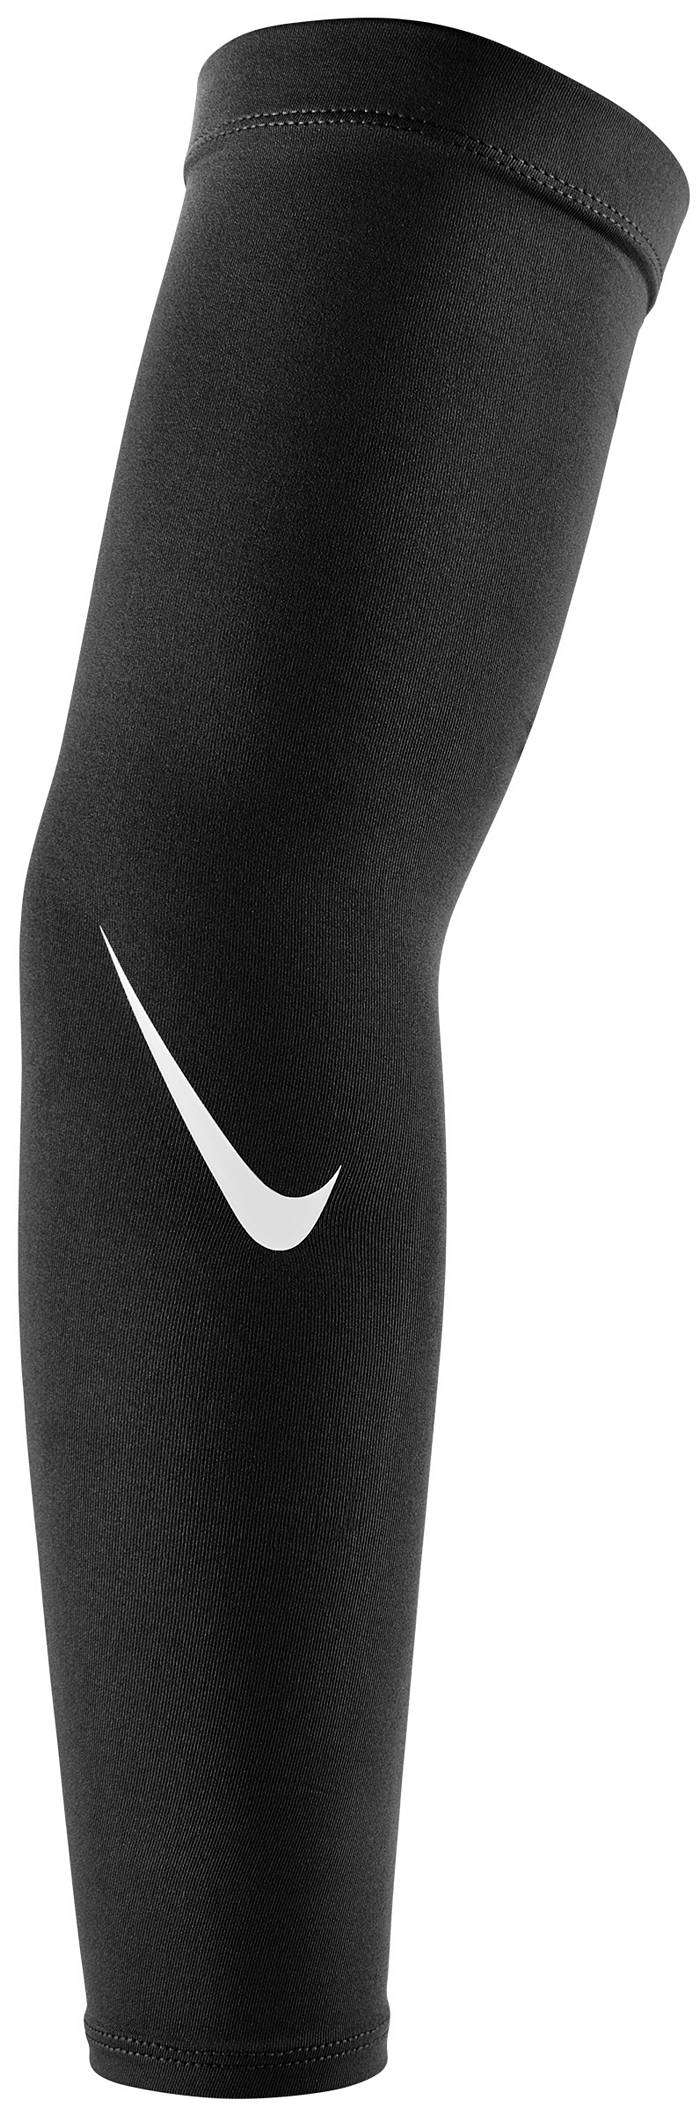 NIKE PRO FOOTBALL SLEEVES W/ DRI-FIT WHITE ONE PAIR S/M NEW IN BOX